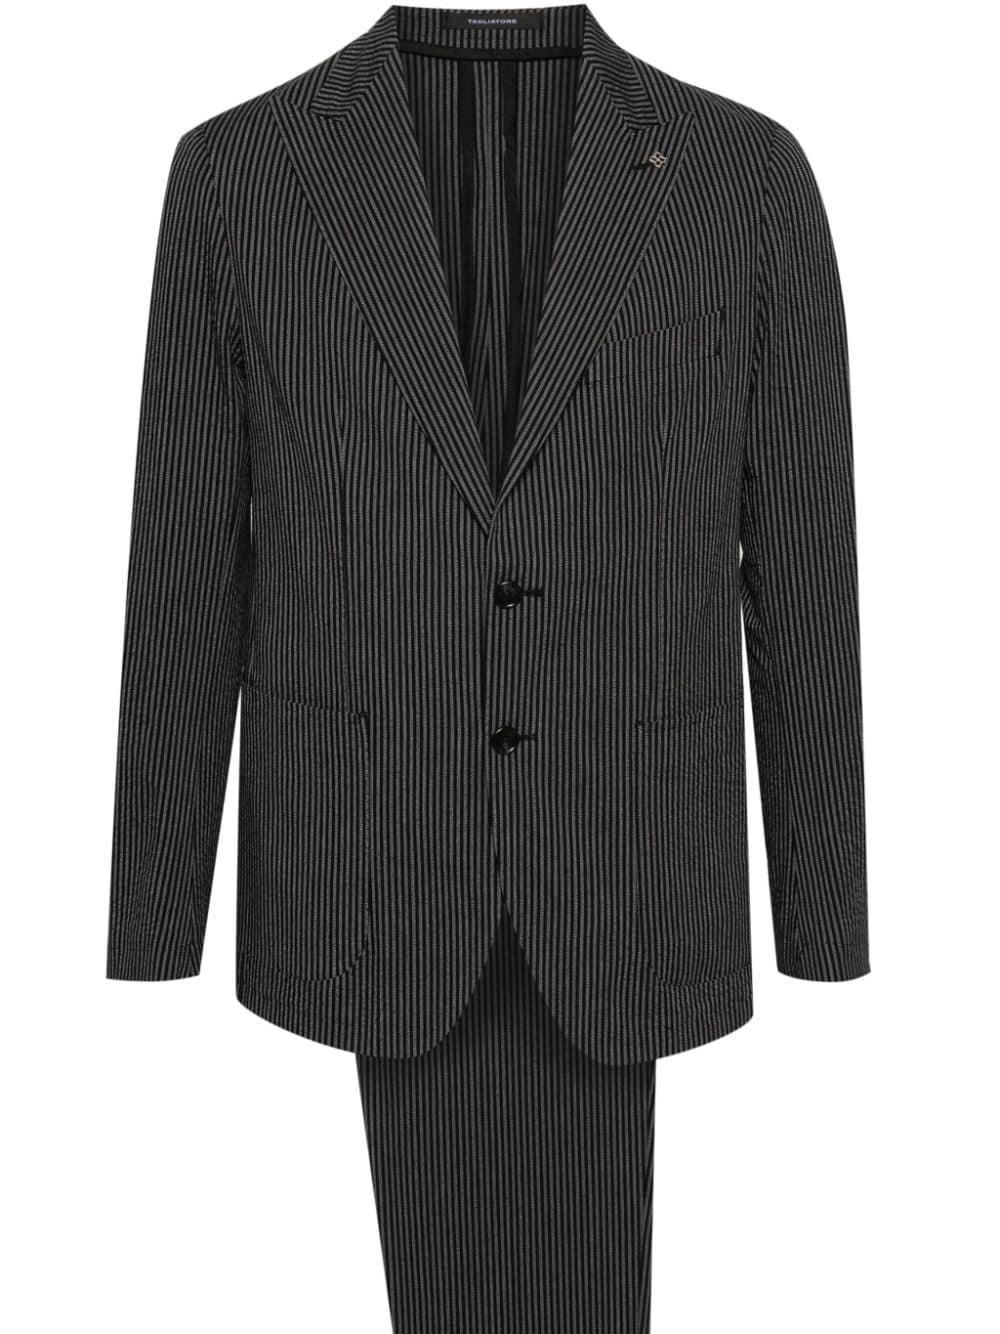 Image 1 of Tagliatore striped single-breasted suit